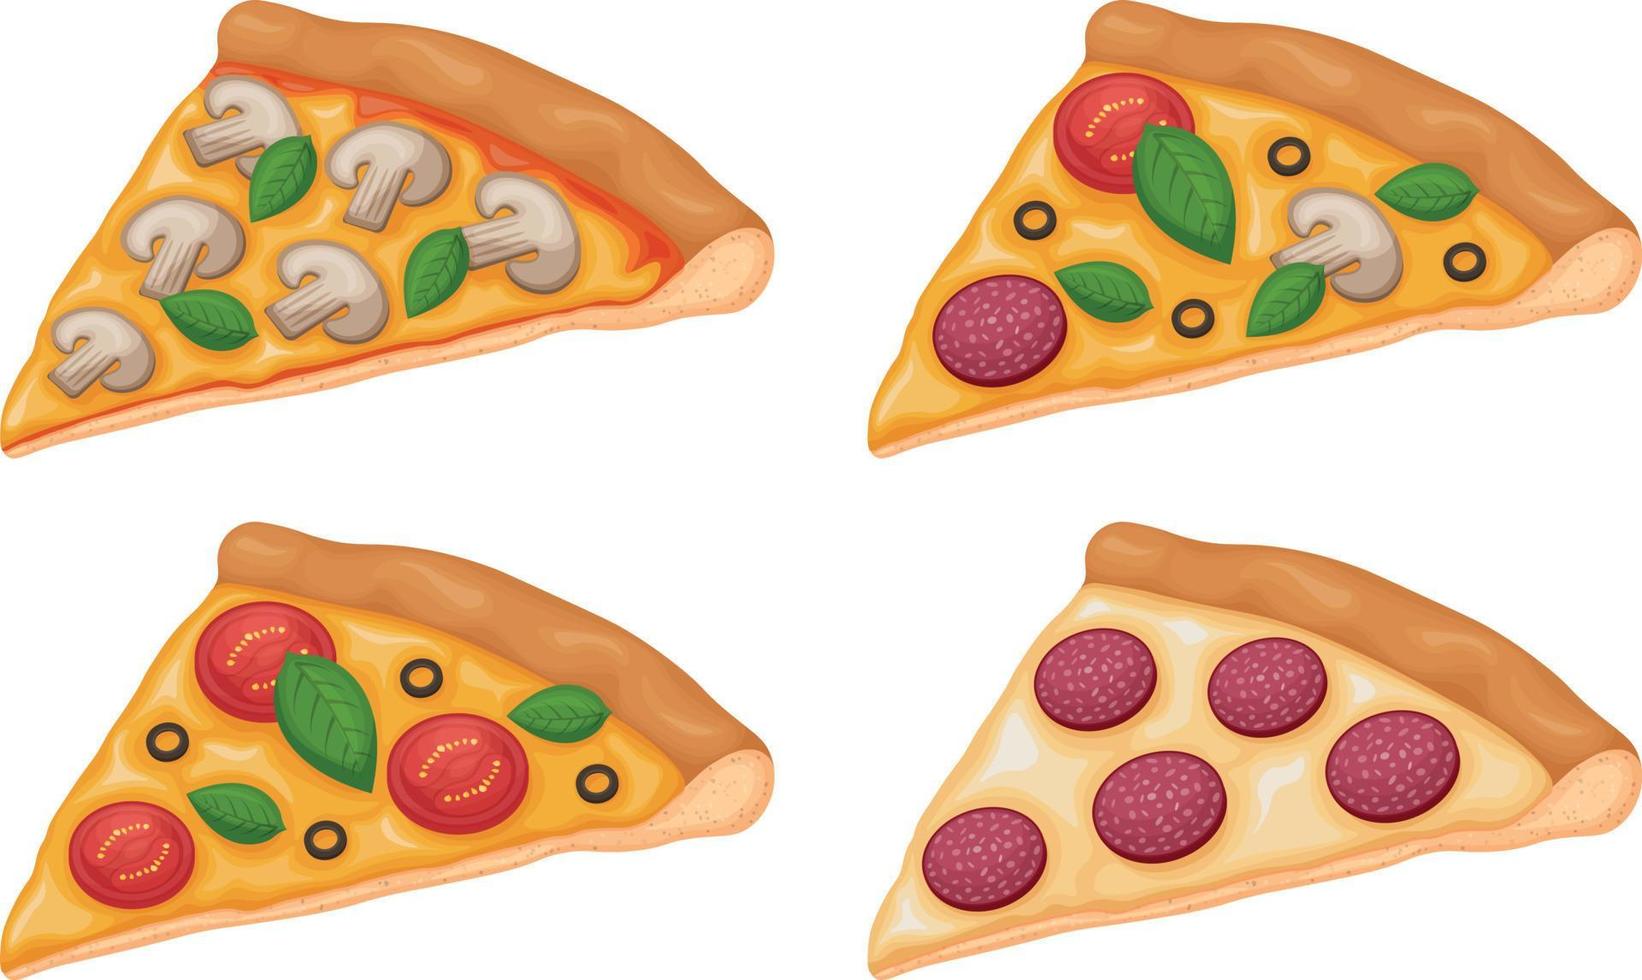 Pizza set . A collection of four slices of pizza with various fillings. Pizza with sausage, mushrooms, tomatoes and cheese. Vector illustration isolated on a white background